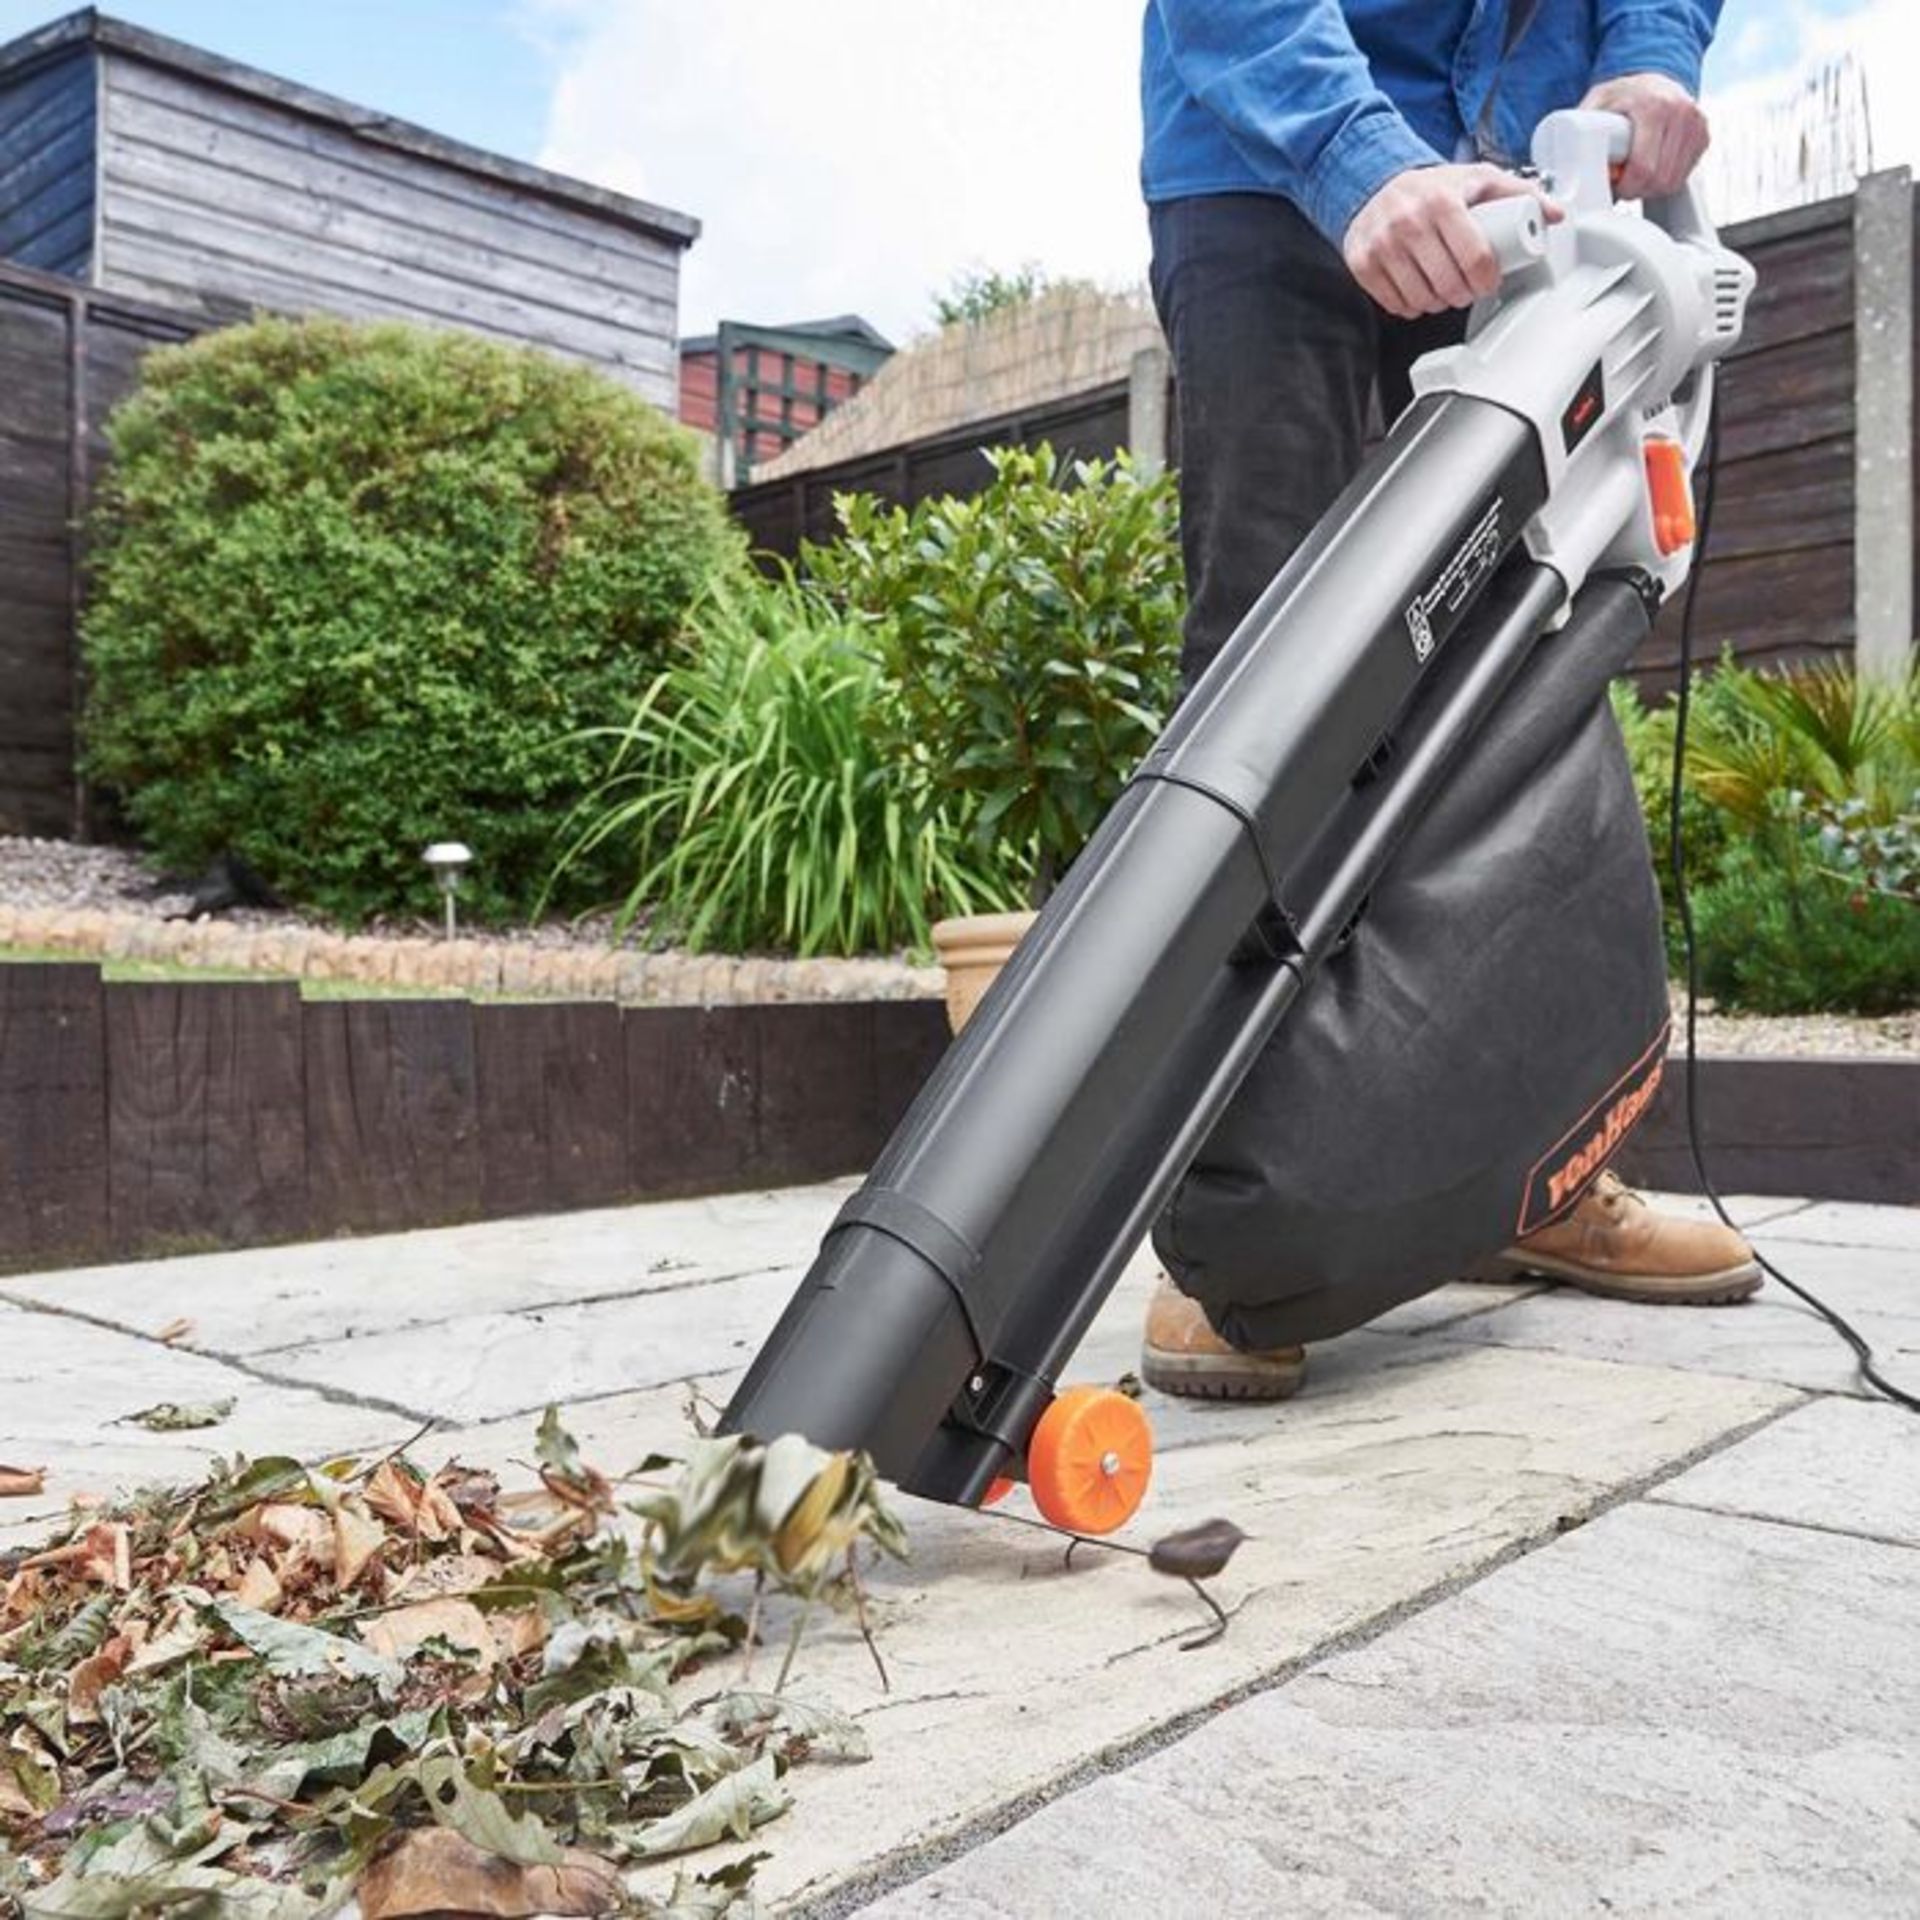 (V321) 3000W Leaf Blower Keep your garden tidy with the Leaf Blower Powerful 3000W motor blow... - Image 4 of 4